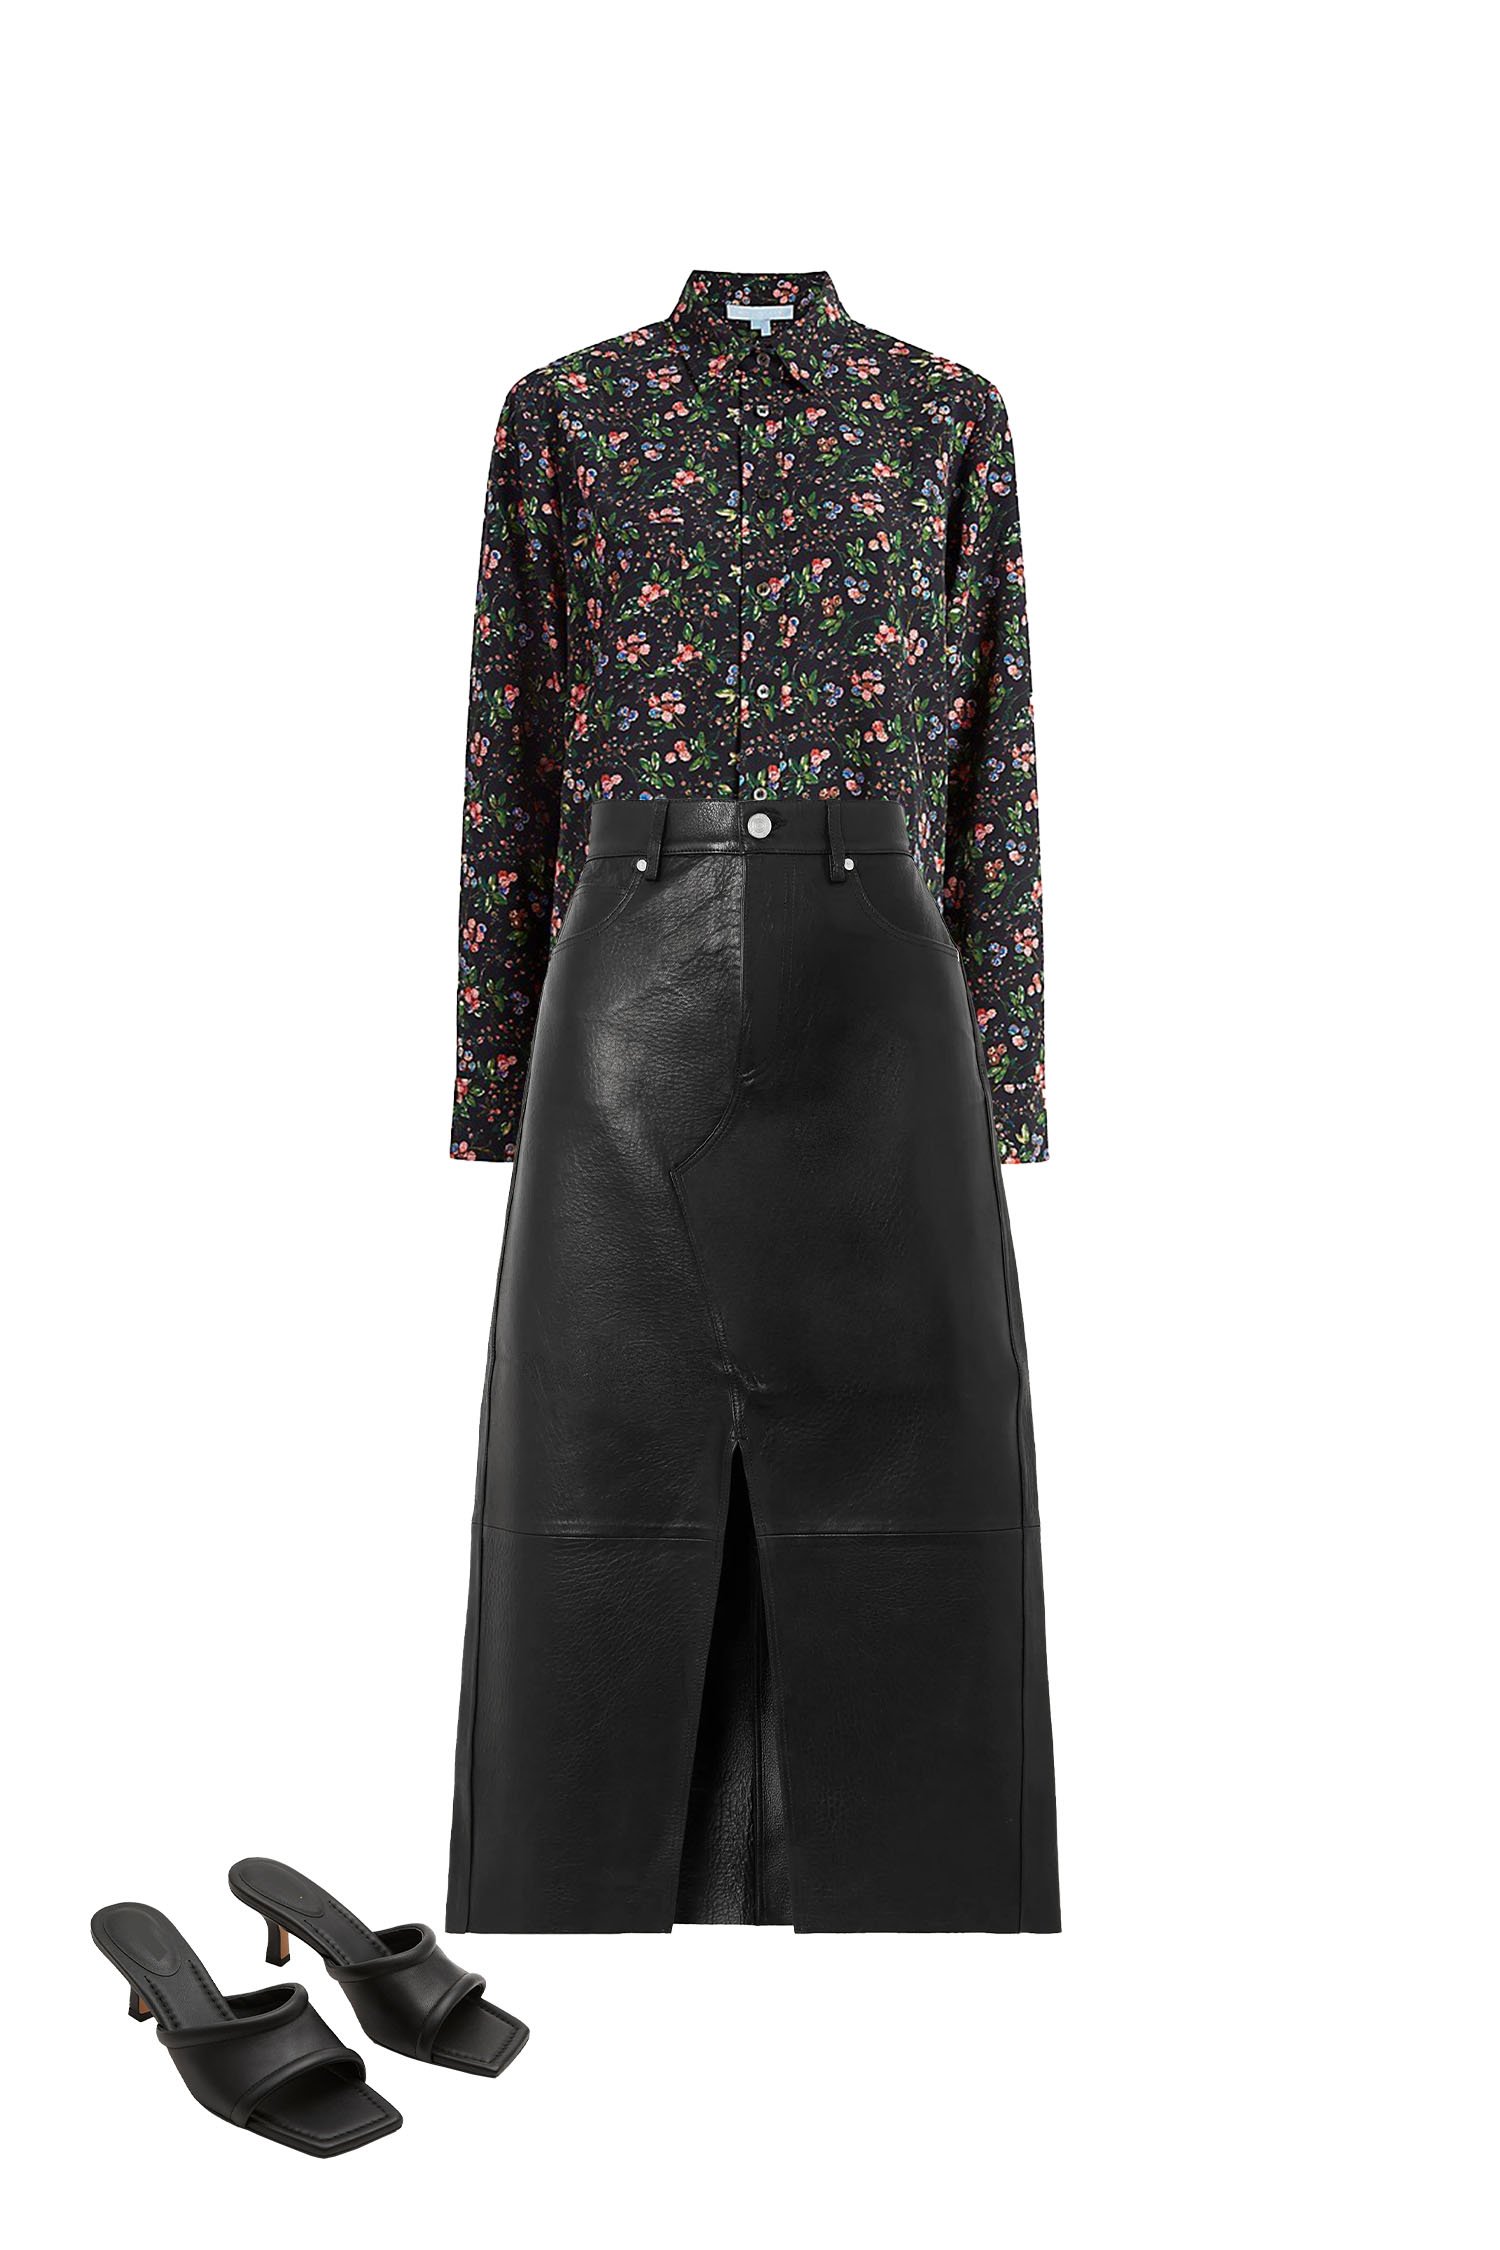 Black Leather Midi Skirt Outfit with Black Floral Print Shirt and Black Square Toe Kitten Heel Sandals